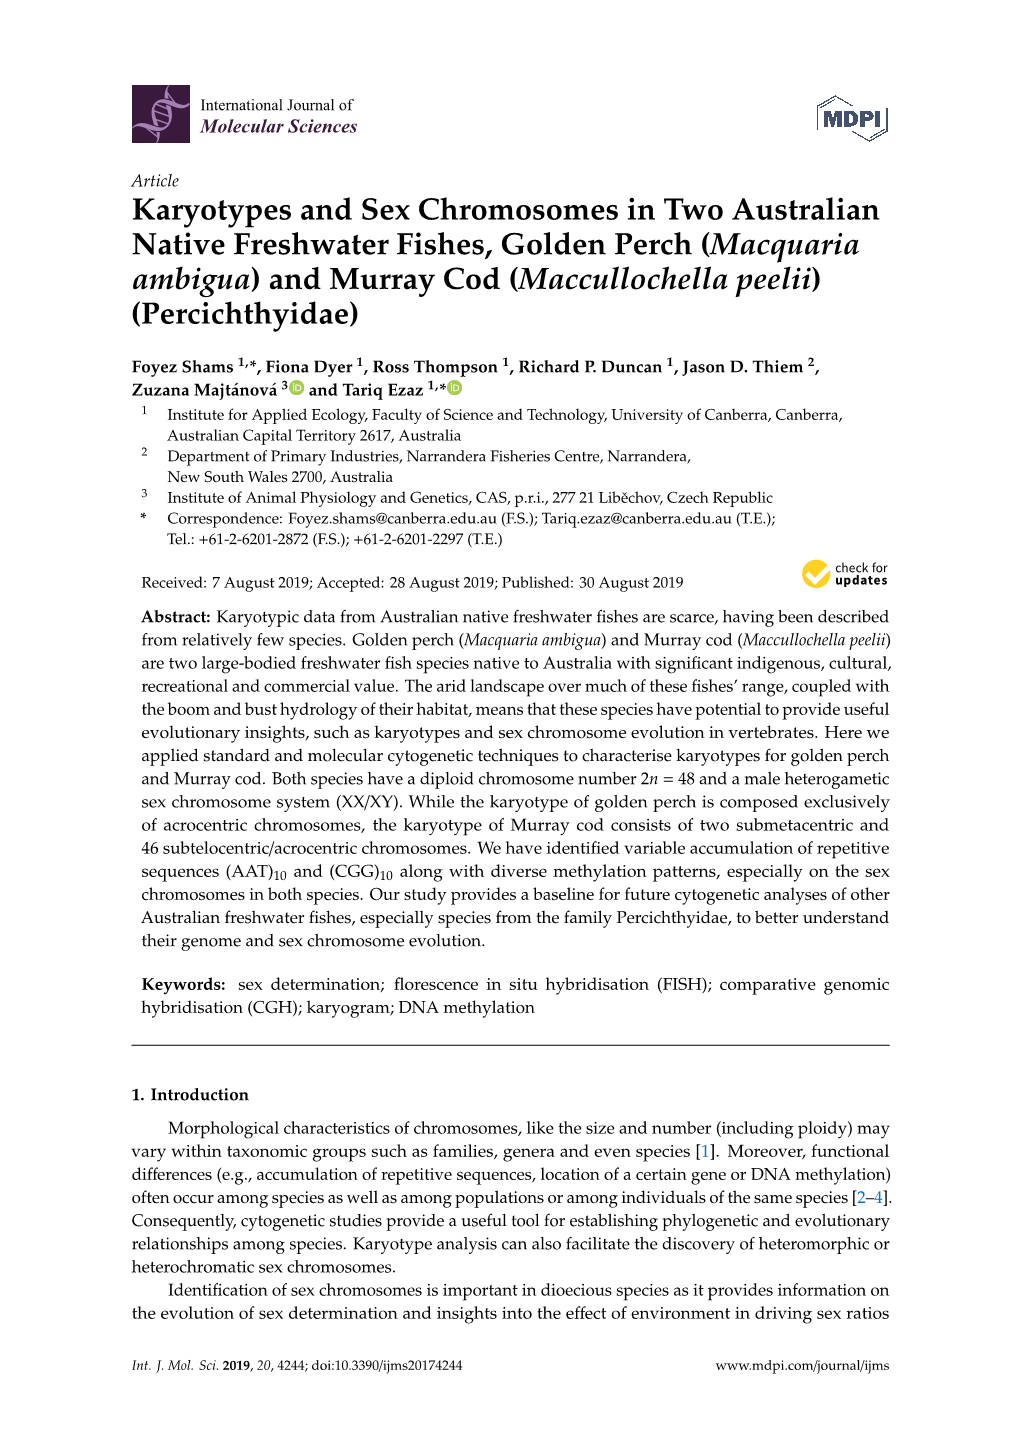 Karyotypes and Sex Chromosomes in Two Australian Native Freshwater Fishes, Golden Perch (Macquaria Ambigua) and Murray Cod (Maccullochella Peelii) (Percichthyidae)